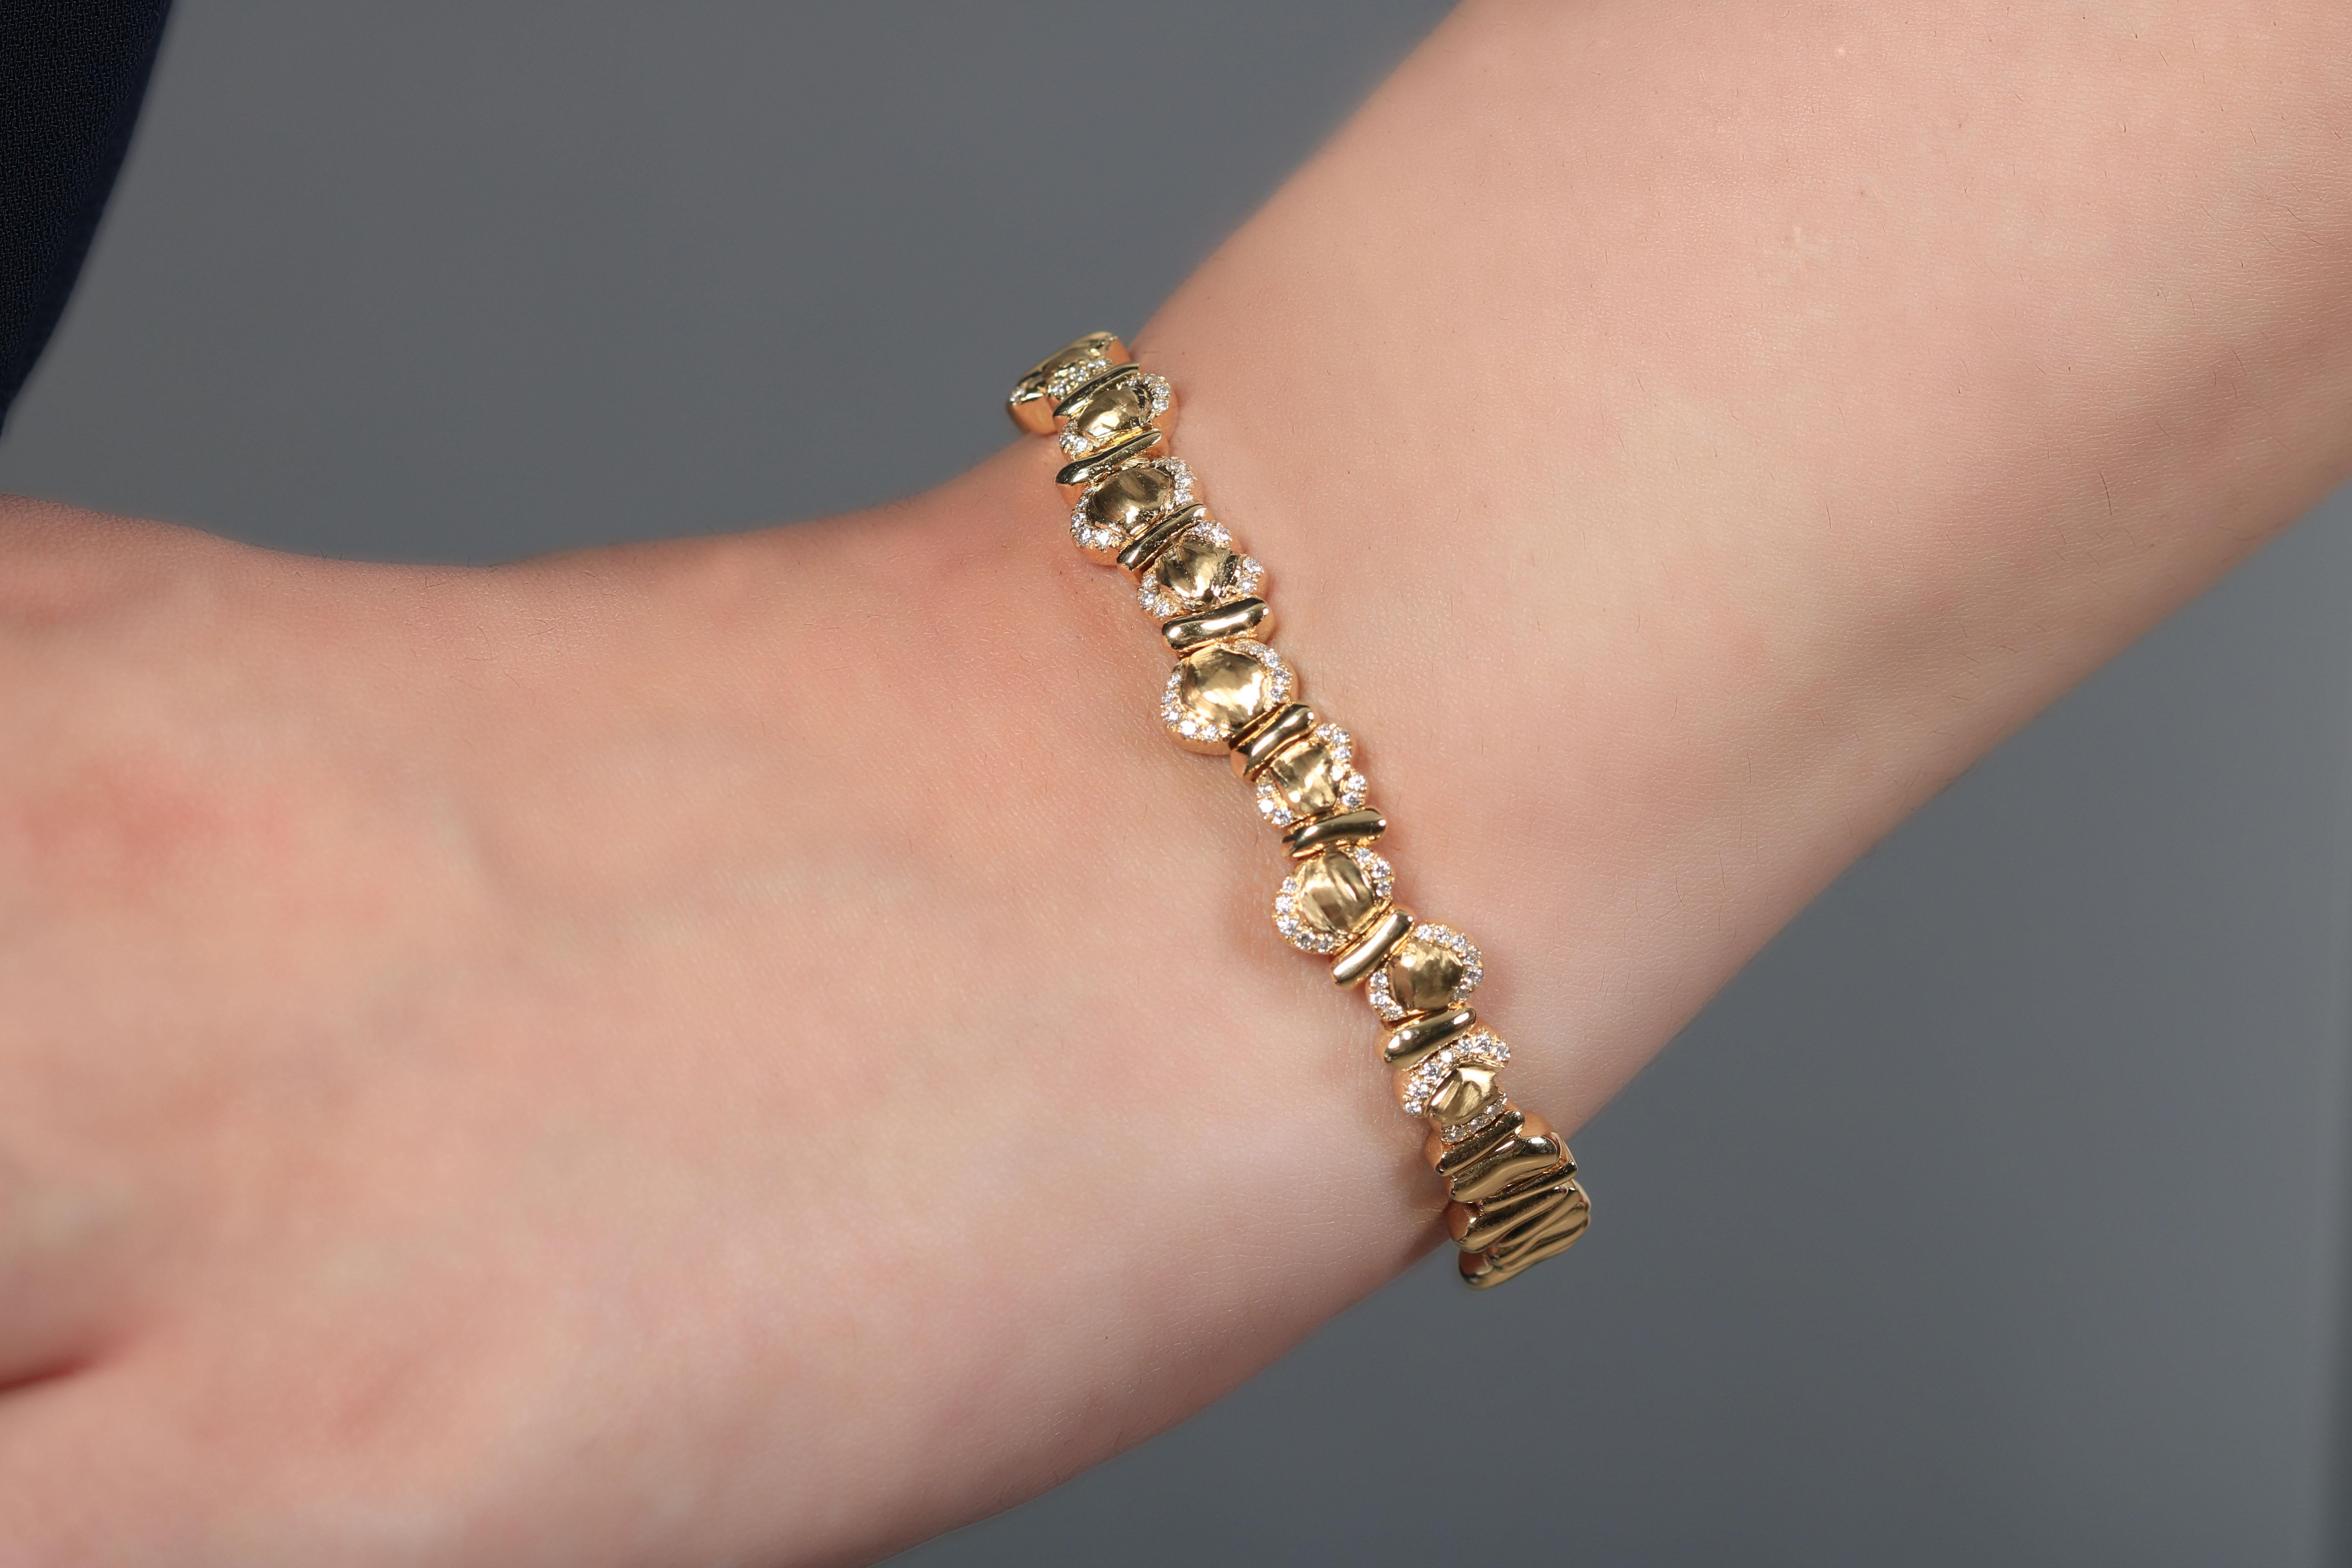 A perfect addition, this unique gold bracelet is set using yellow gold and white diamonds bound together forming an innovative look. The sophisticated design is timeless and absolutely compelling. Its beaded appearance and make it especially